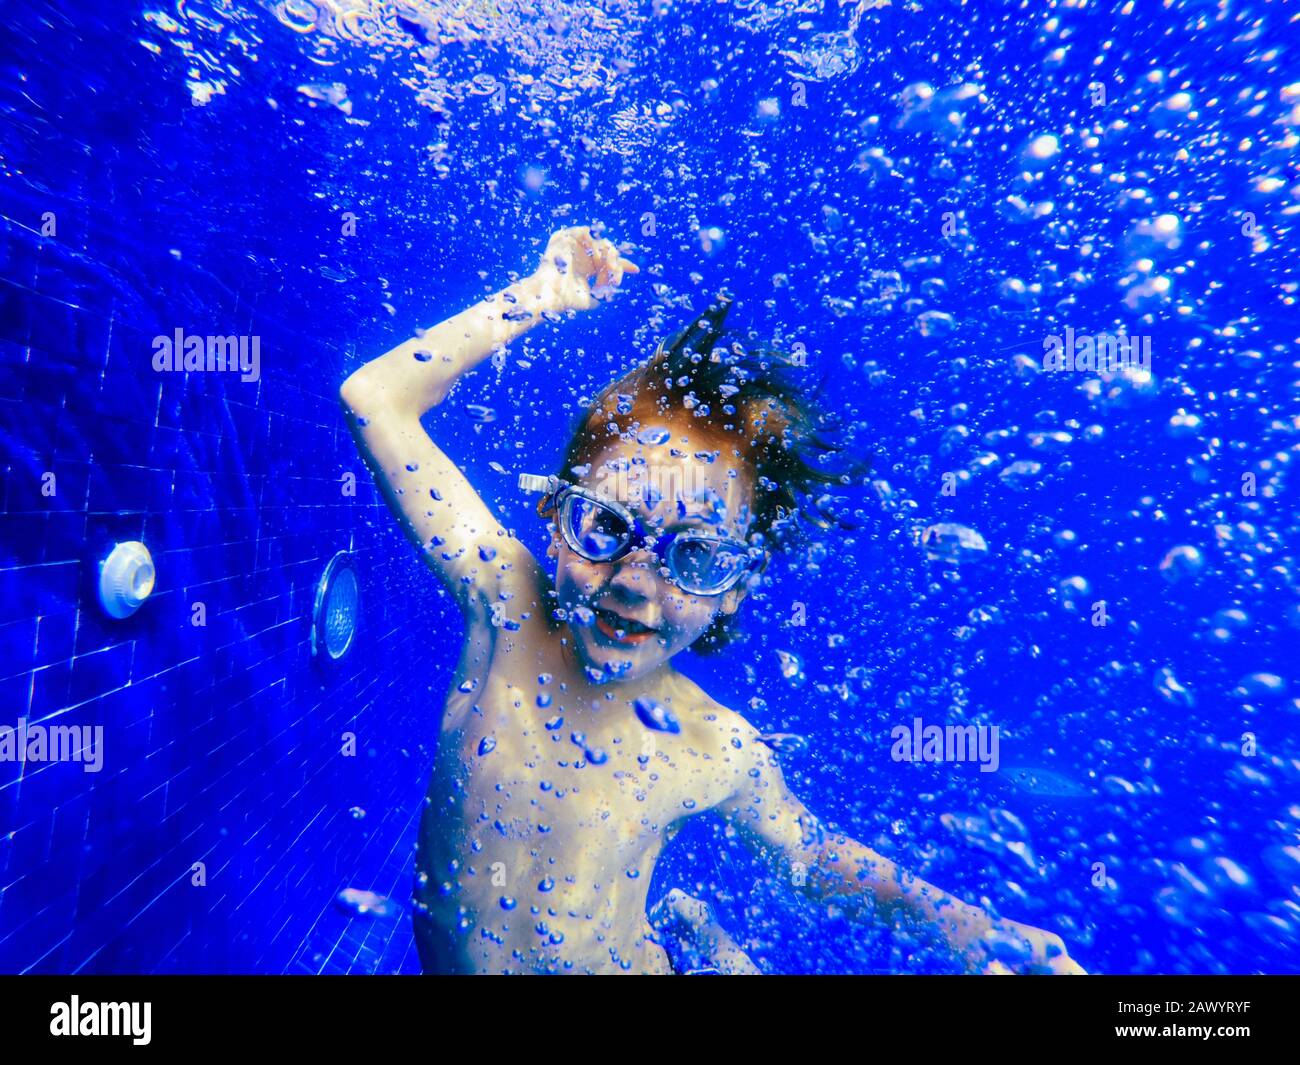 Portrait playful boy swimming underwater in blue swimming pool Stock Photo